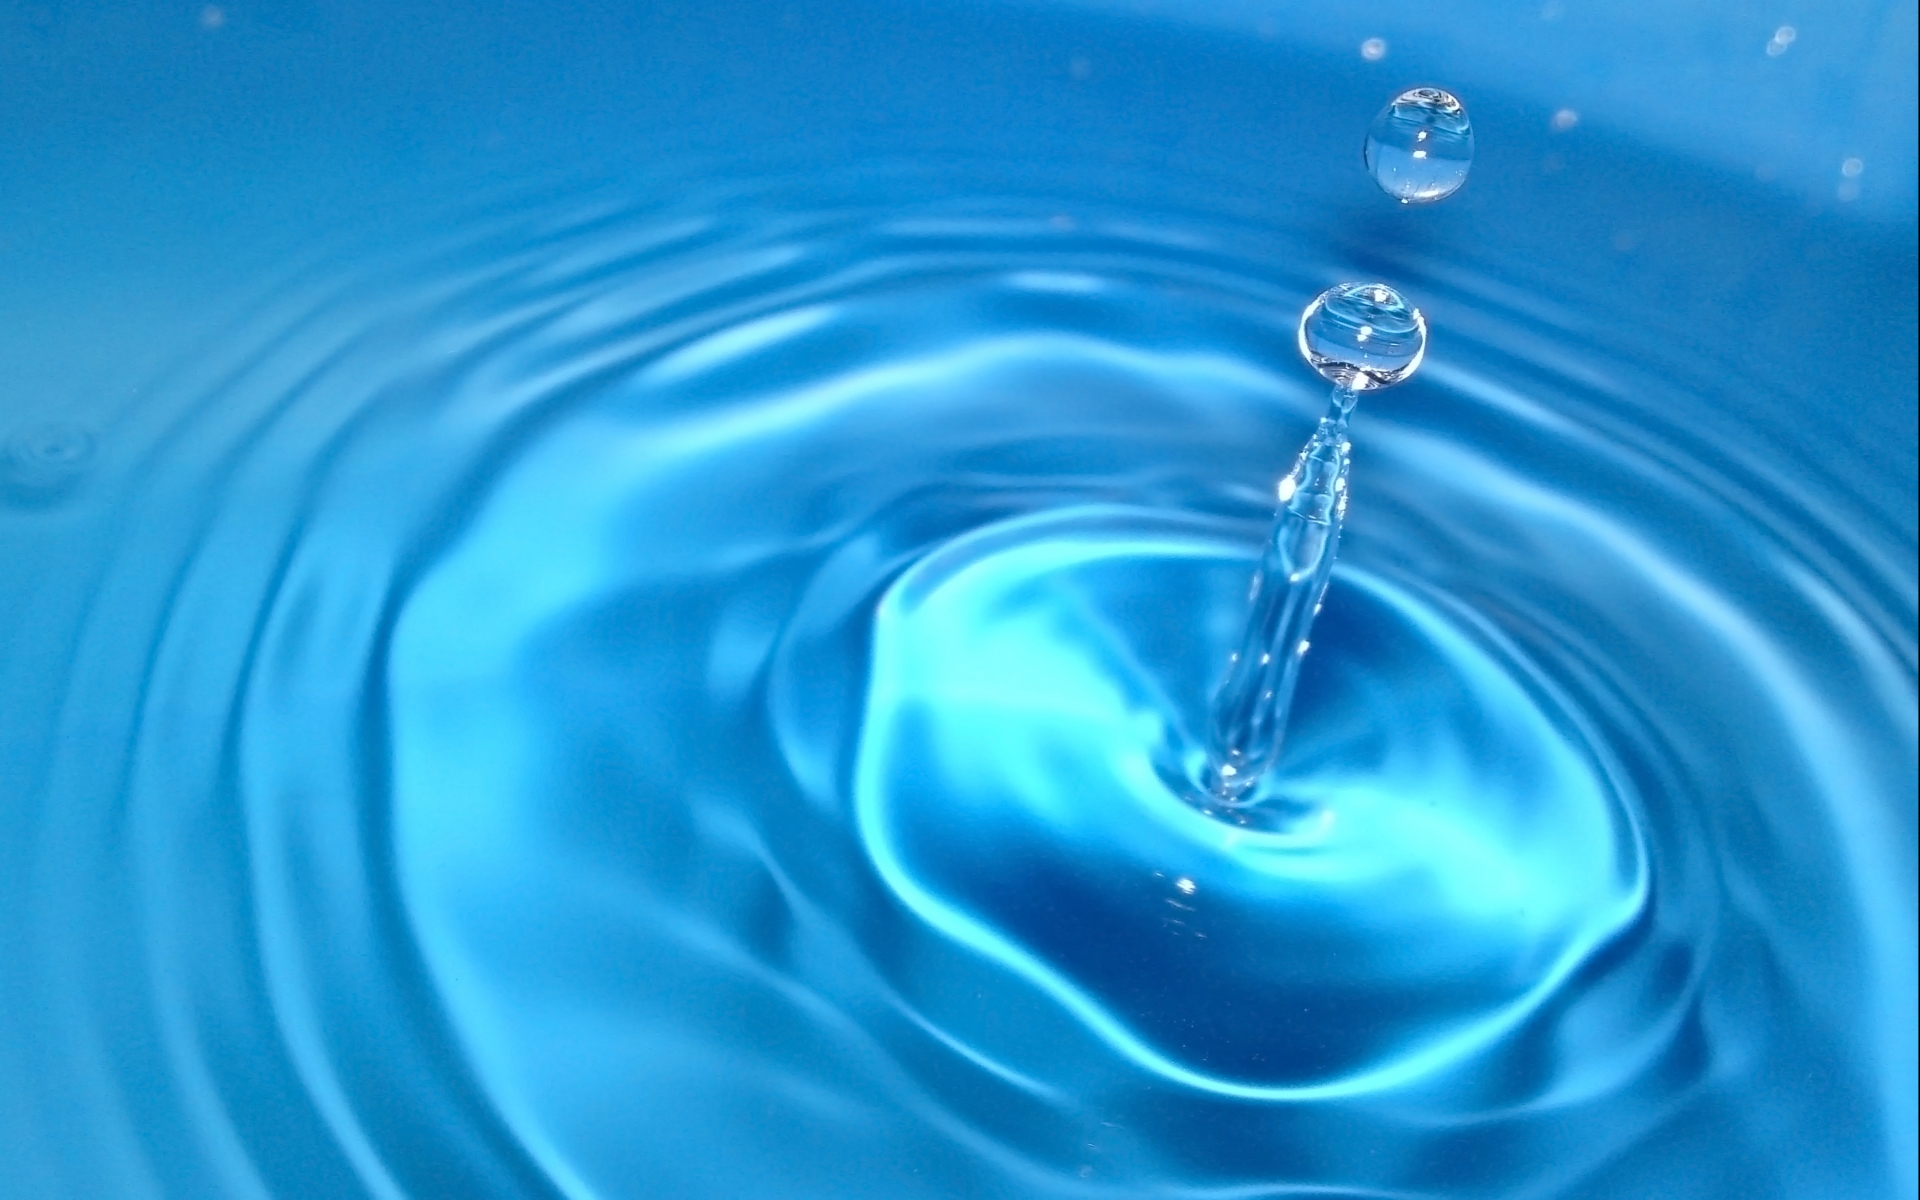 “Water: The Essential Elixir for Health and Wellness”